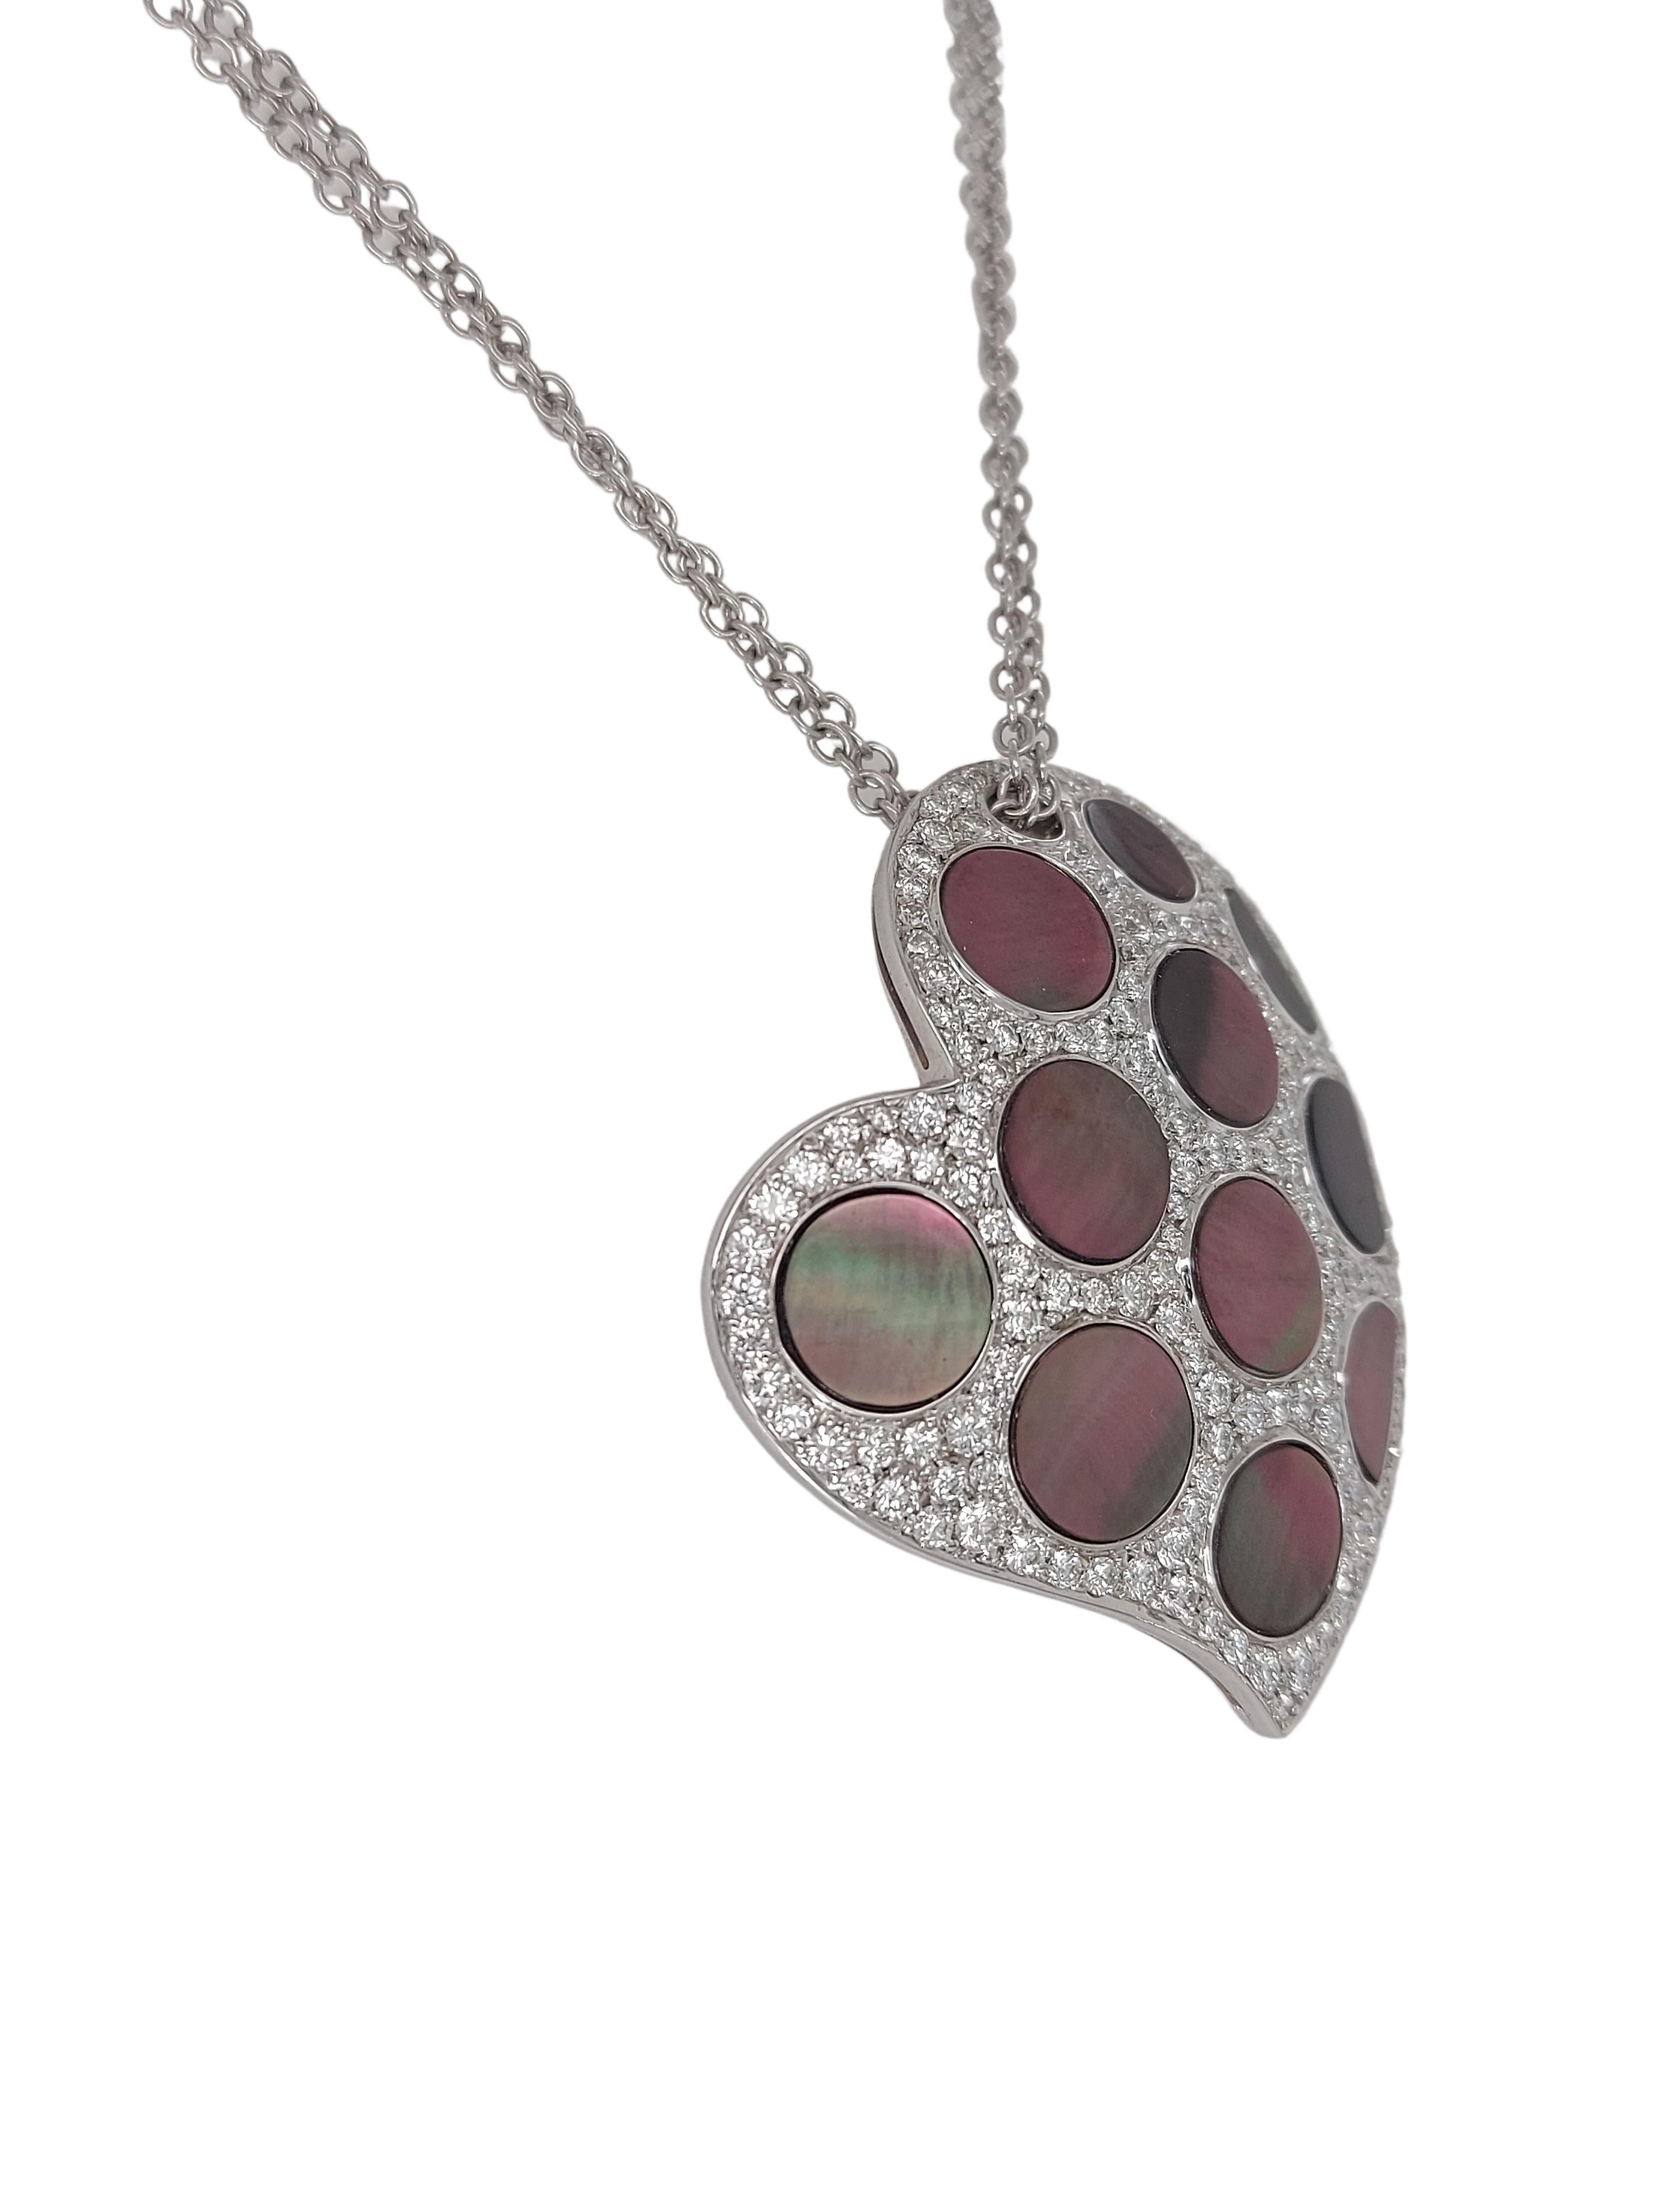 Gorgeous 18kt White Gold Diamond Pendant Necklace & Black Mother of Pearl For Sale 1